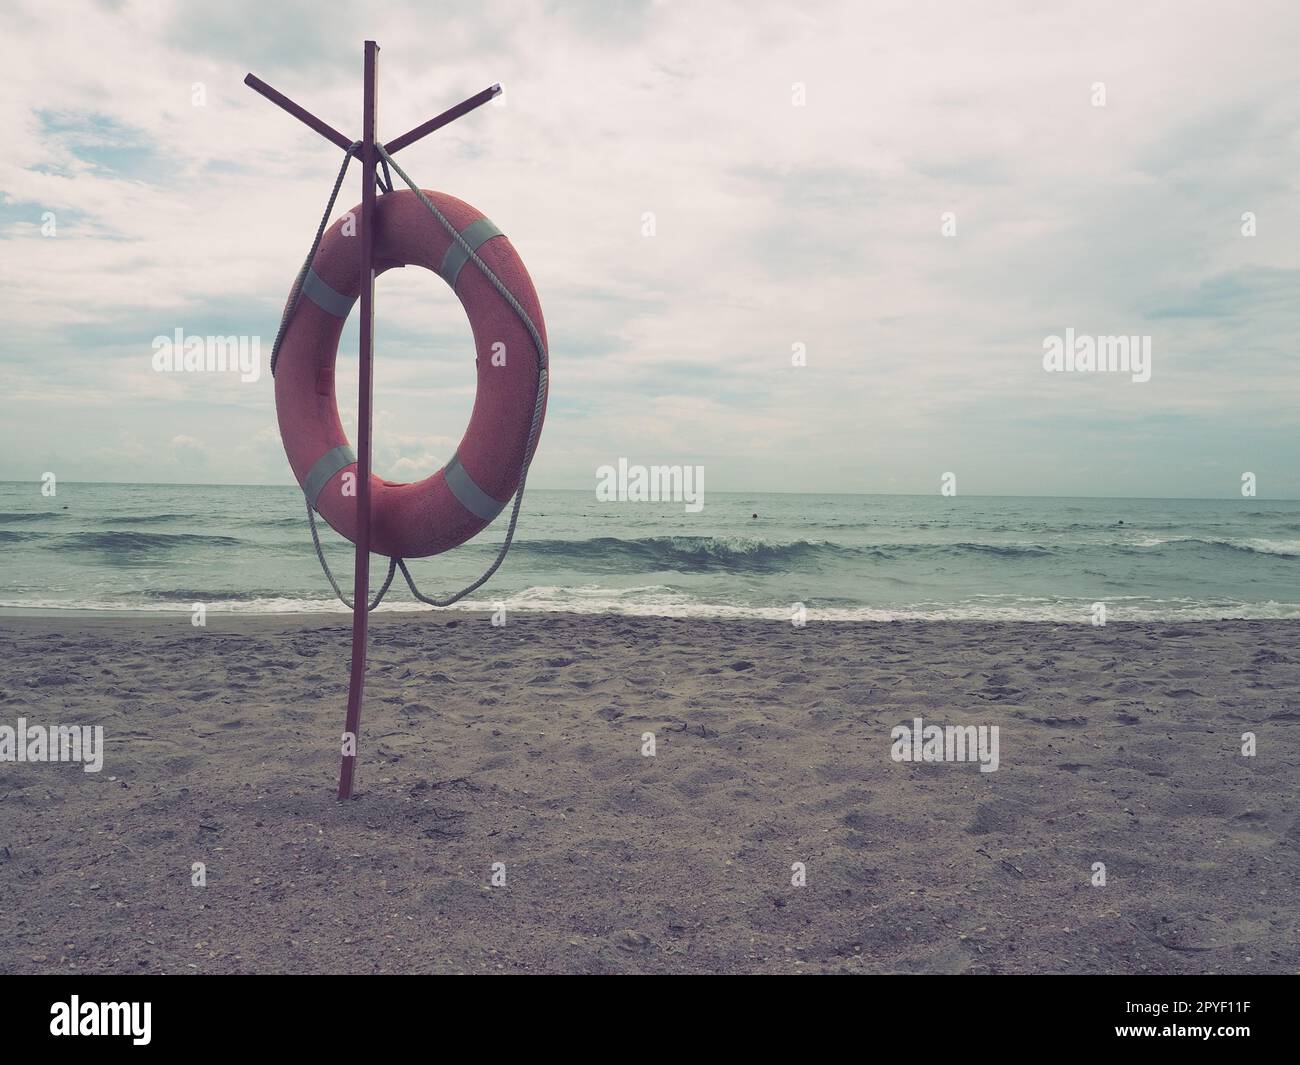 Lifebuoy on a sandy beach. Orange circle on a pole to rescue people drowning in the sea. Rescue point on the shore. Sky and sea in the background. Retro vintage photography. Nostalgic sad mood Stock Photo